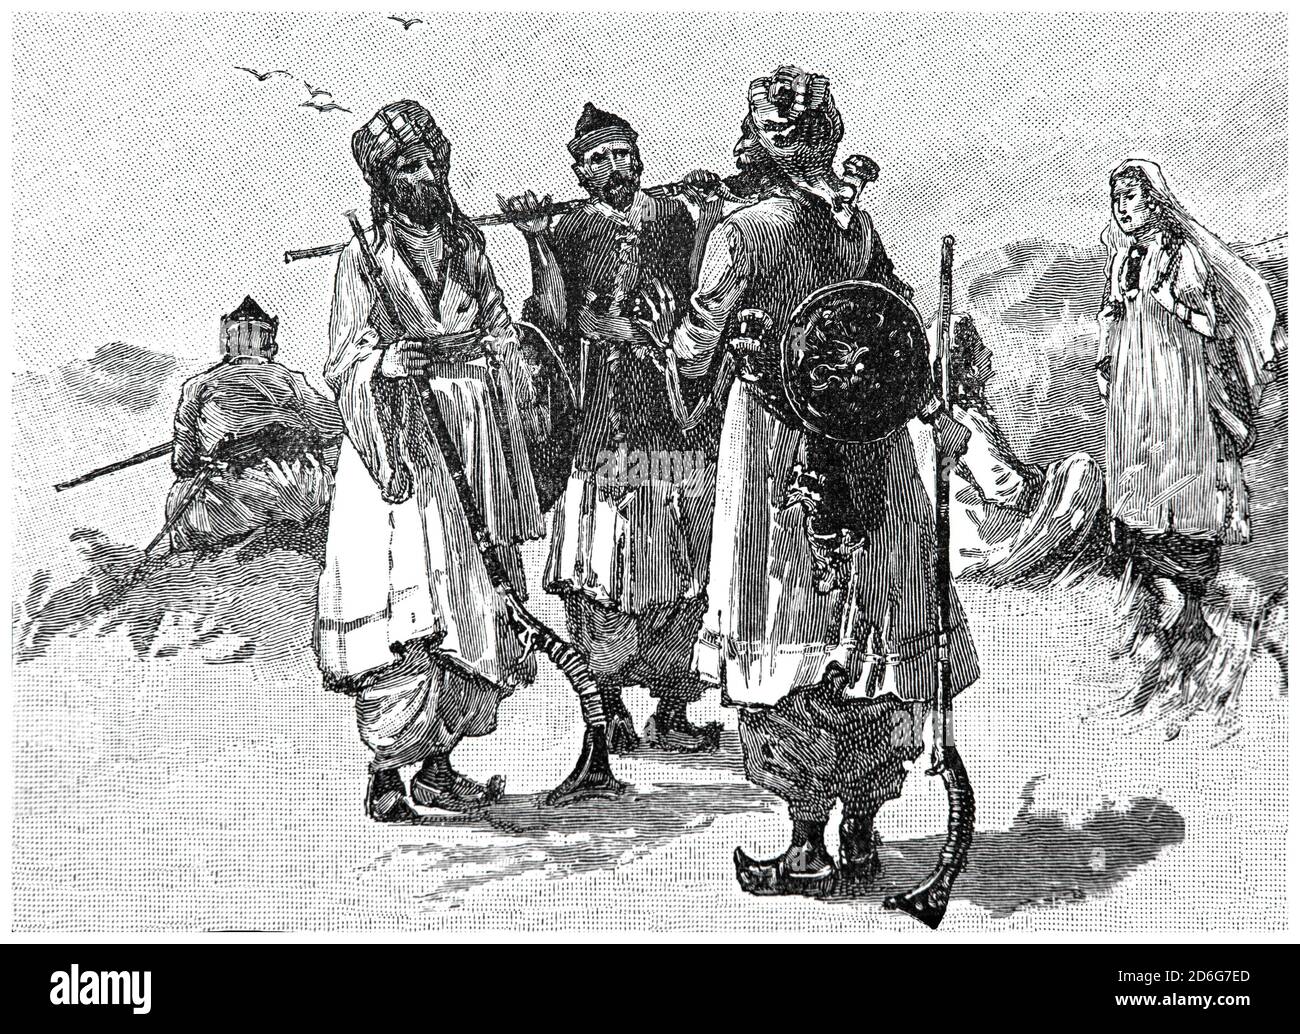 A group of 19th century Afghan warriors. In 1838, the British marched into Afghanistan, but following an uprising, retreated from Kabul in 1842, but recaptured it following Battle of Kabul. Following the Second Anglo-Afghan War in 1878, Britain gained control of Afghanistan's foreign relations as part of the Treaty of Gandamak of 1879. Stock Photo